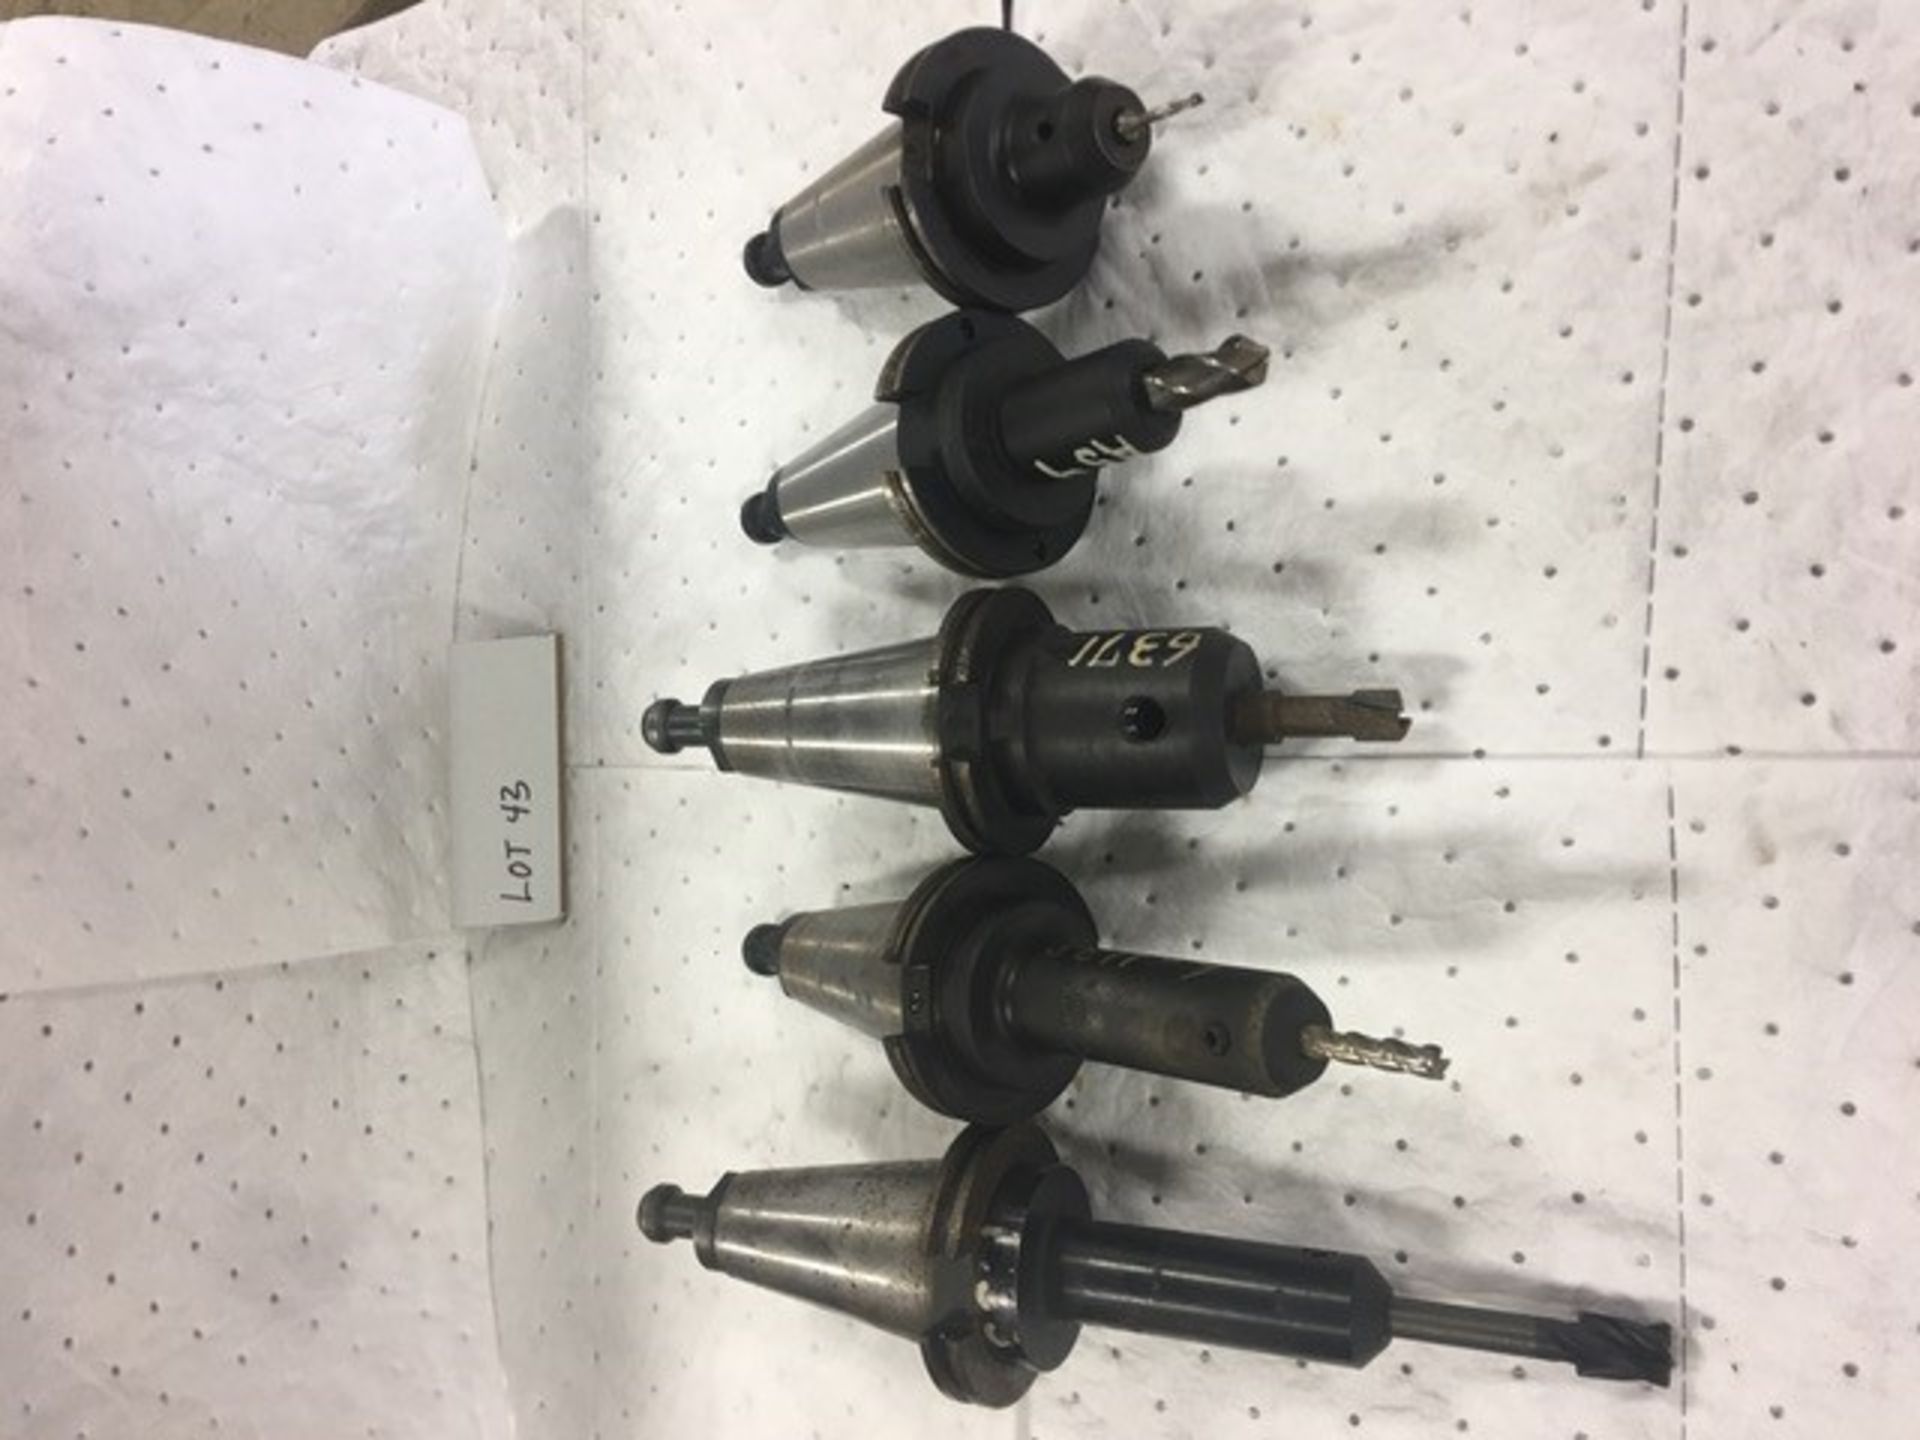 LOT OF 5 CAT 50 ENDMILL HOLDERS, LOCATION MI, BUYER TO SHIP